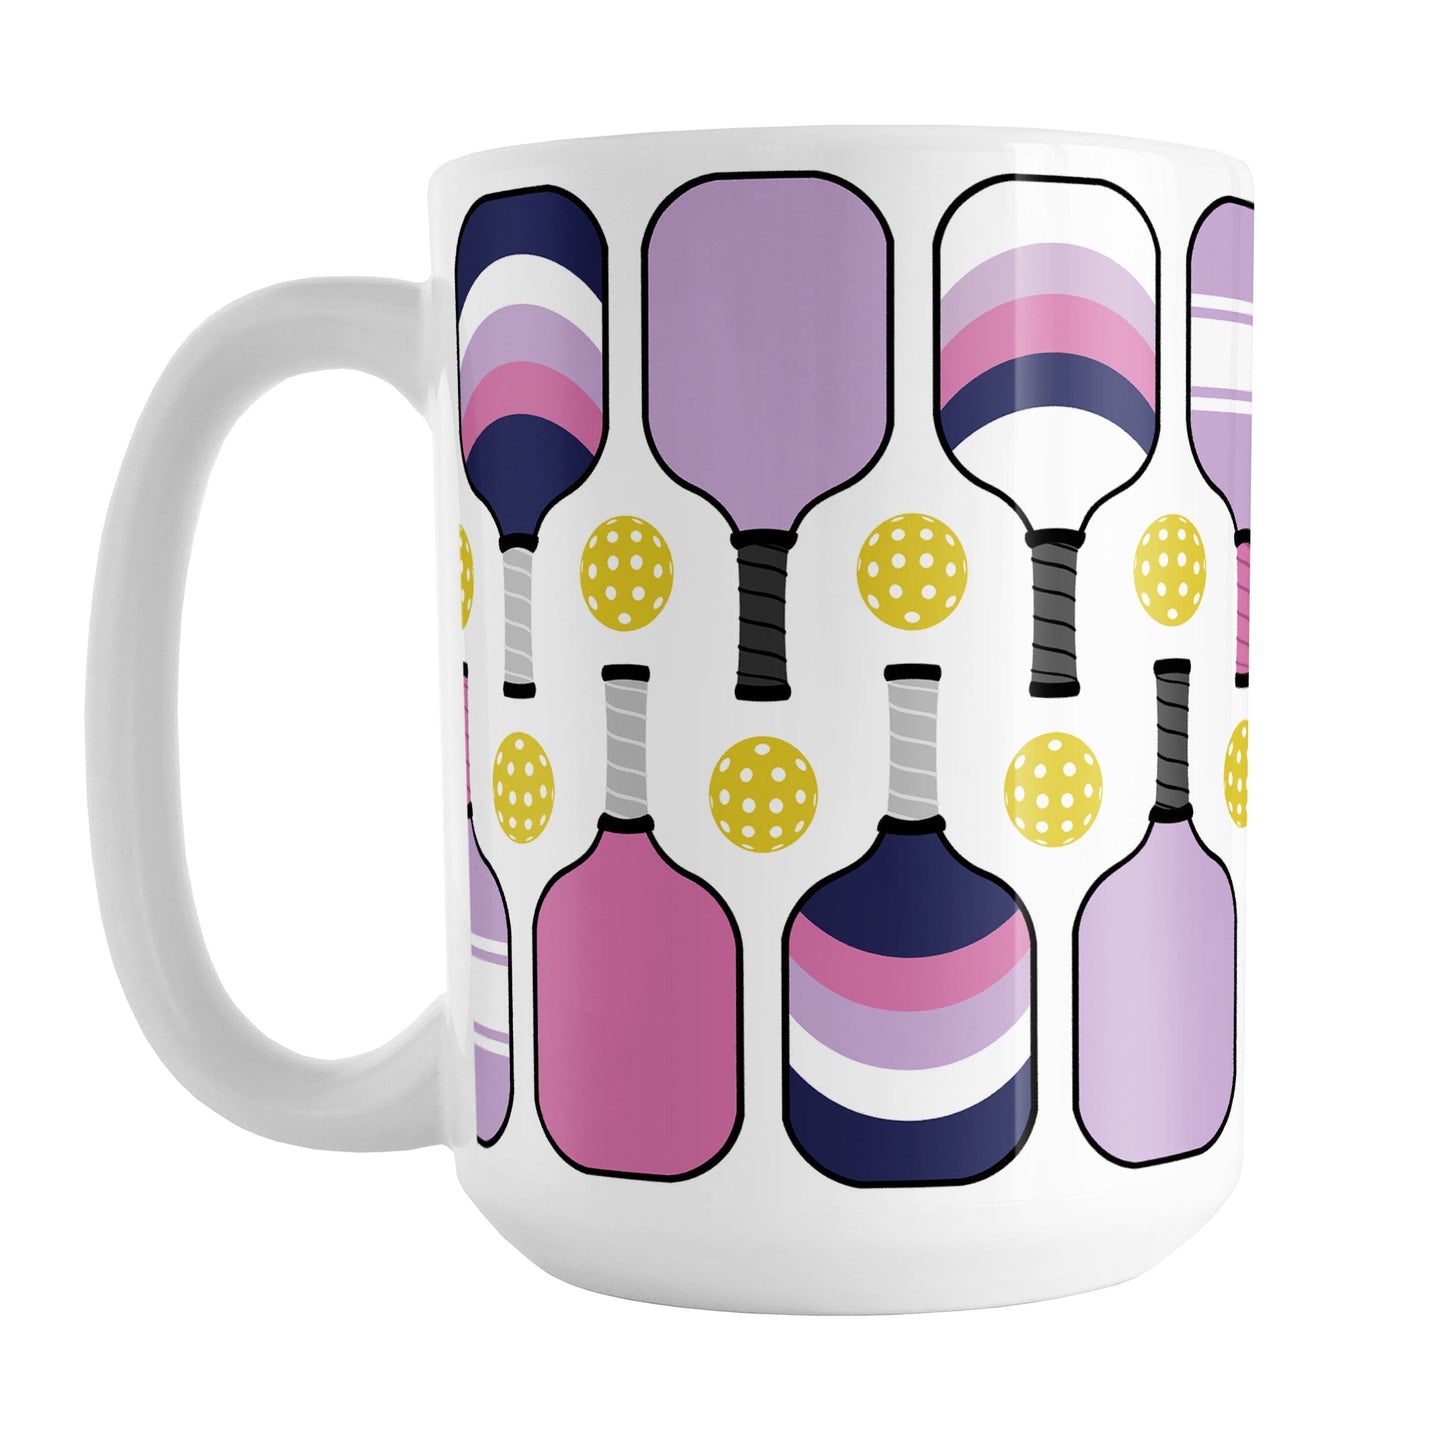 Pink Purple Navy Pickleball Mug (15oz) at Amy's Coffee Mugs. A ceramic coffee mug designed with modern pickleball paddles in bold pink, light purple, and dark navy blue, along with yellow balls in a pattern that wraps around the mug up to the handle.